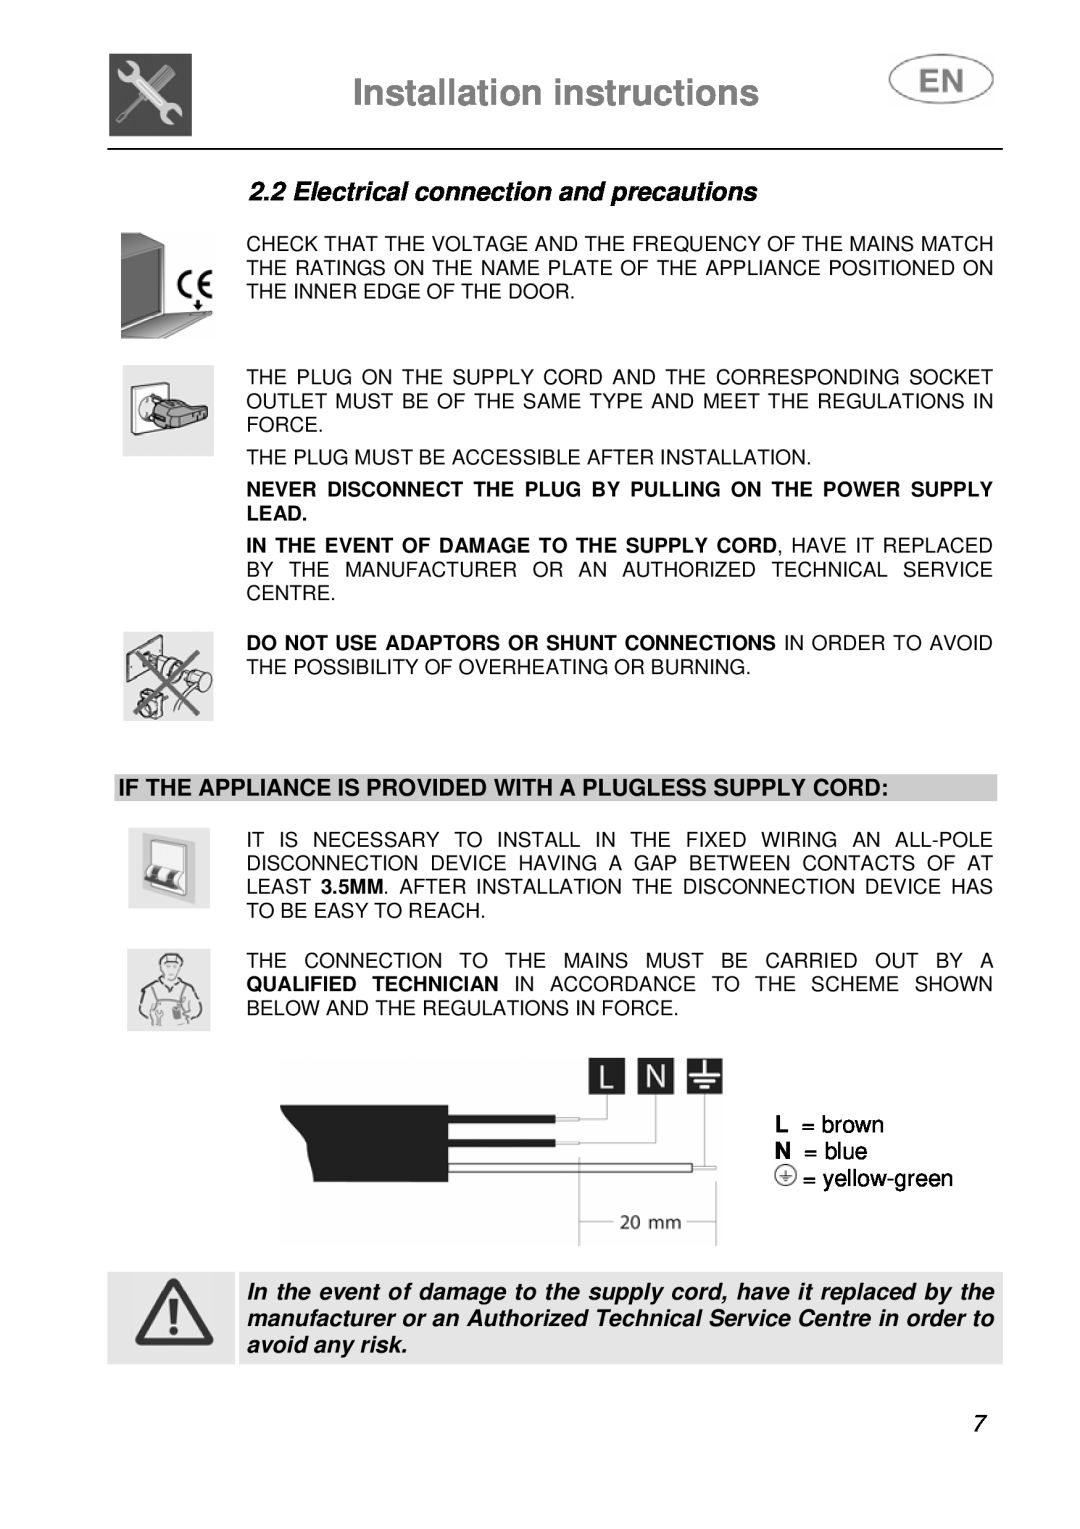 Smeg DI612A1 instruction manual Installation instructions, Electrical connection and precautions 